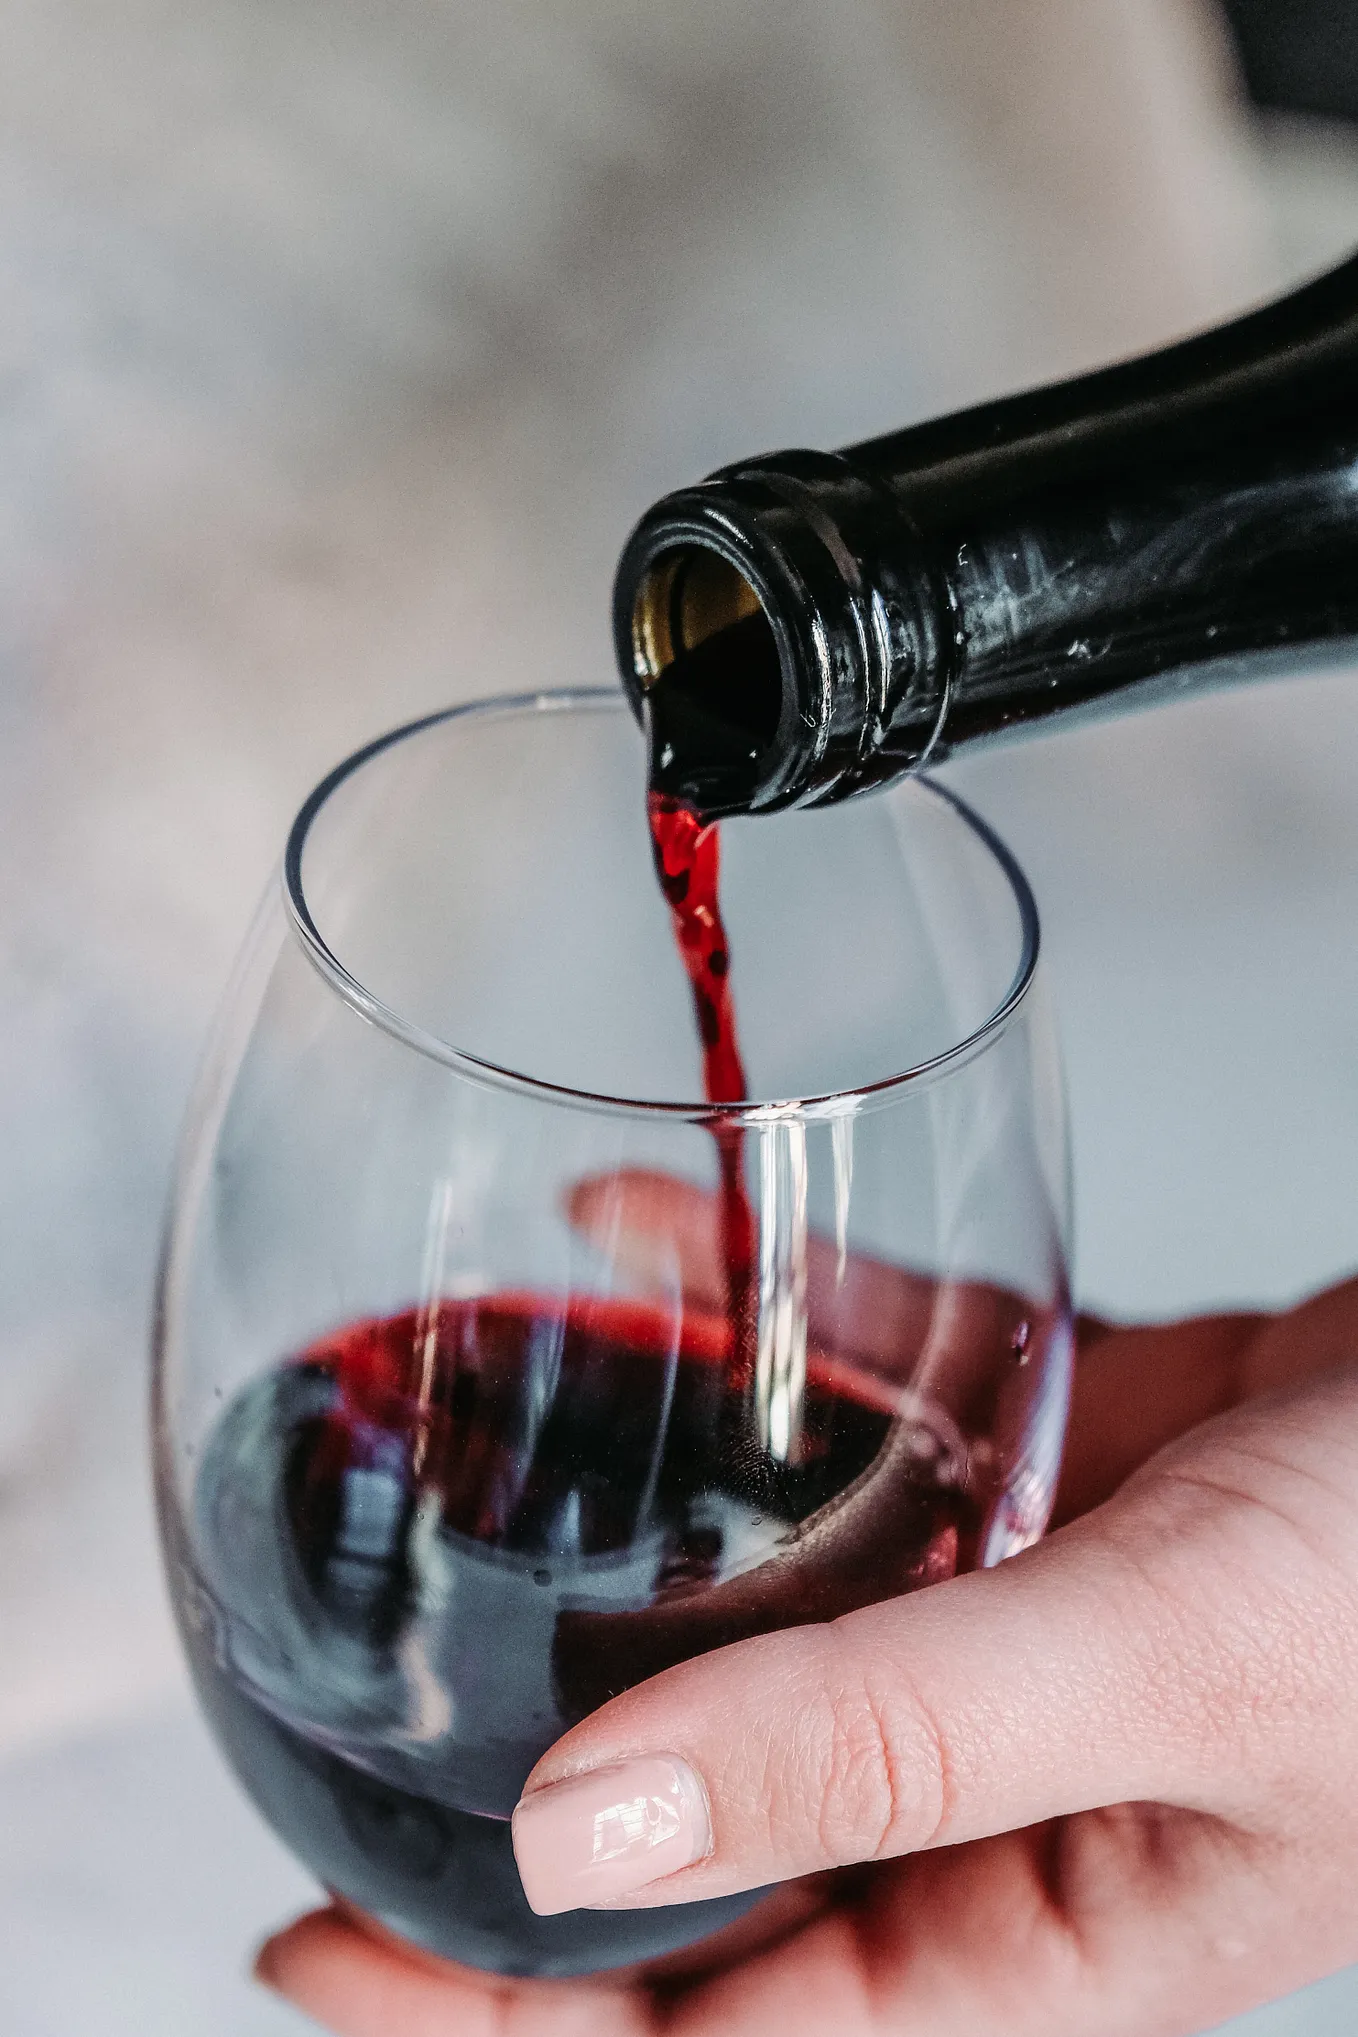 Most People in the U.S. Don’t Know These Six Do’s and Don’ts About Wine